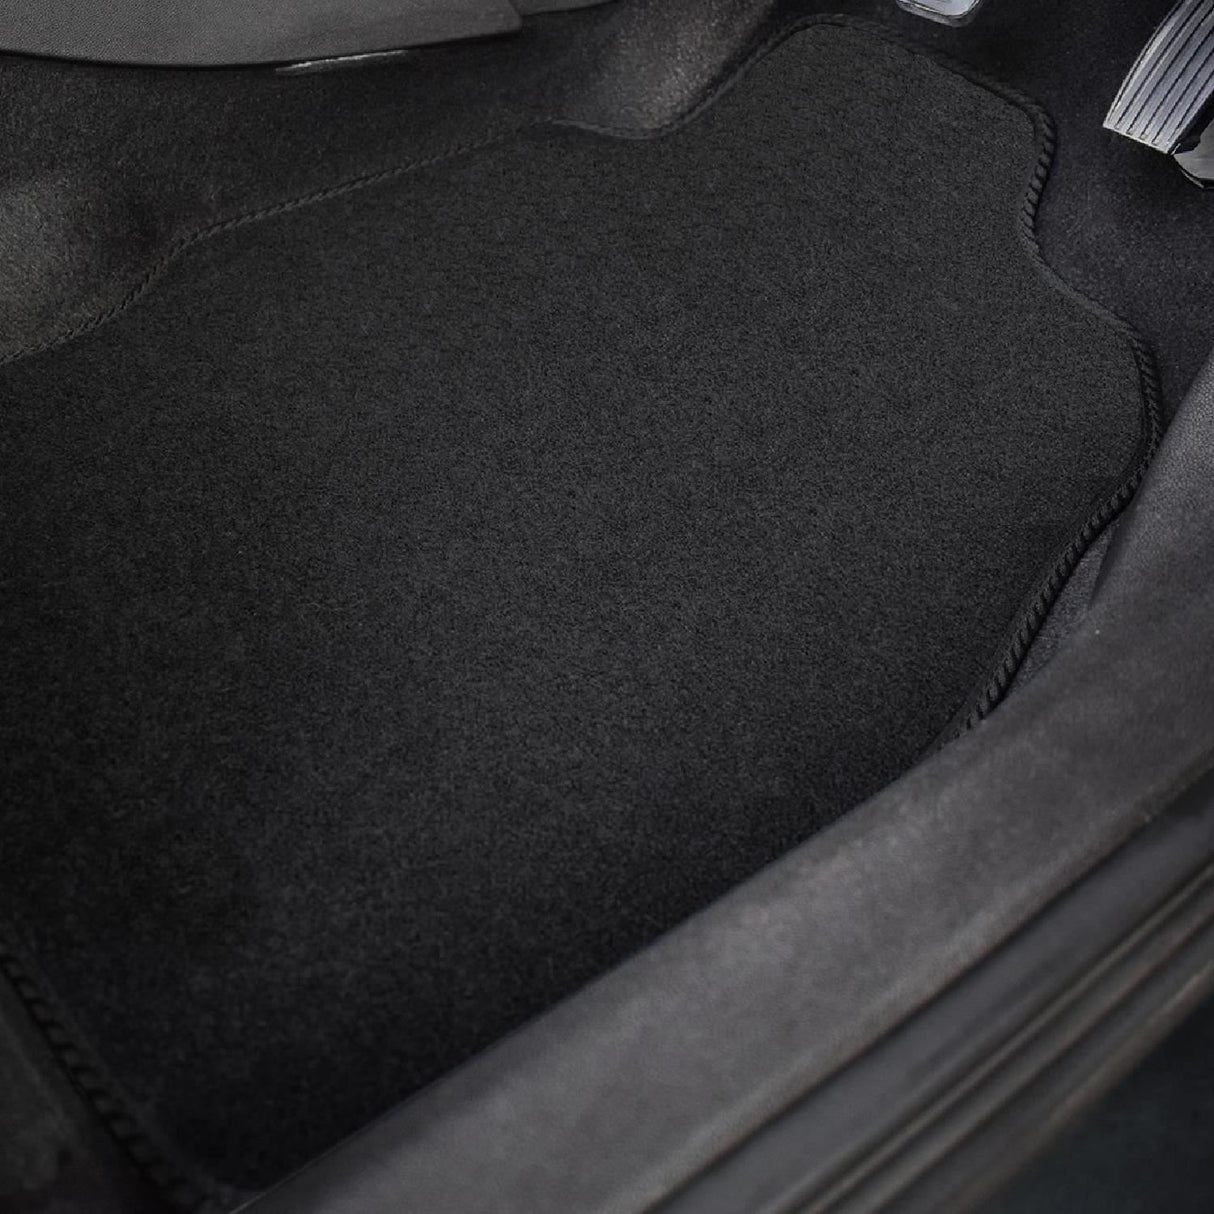 Volvo S60 Automatic Car Mats (2010-2018)